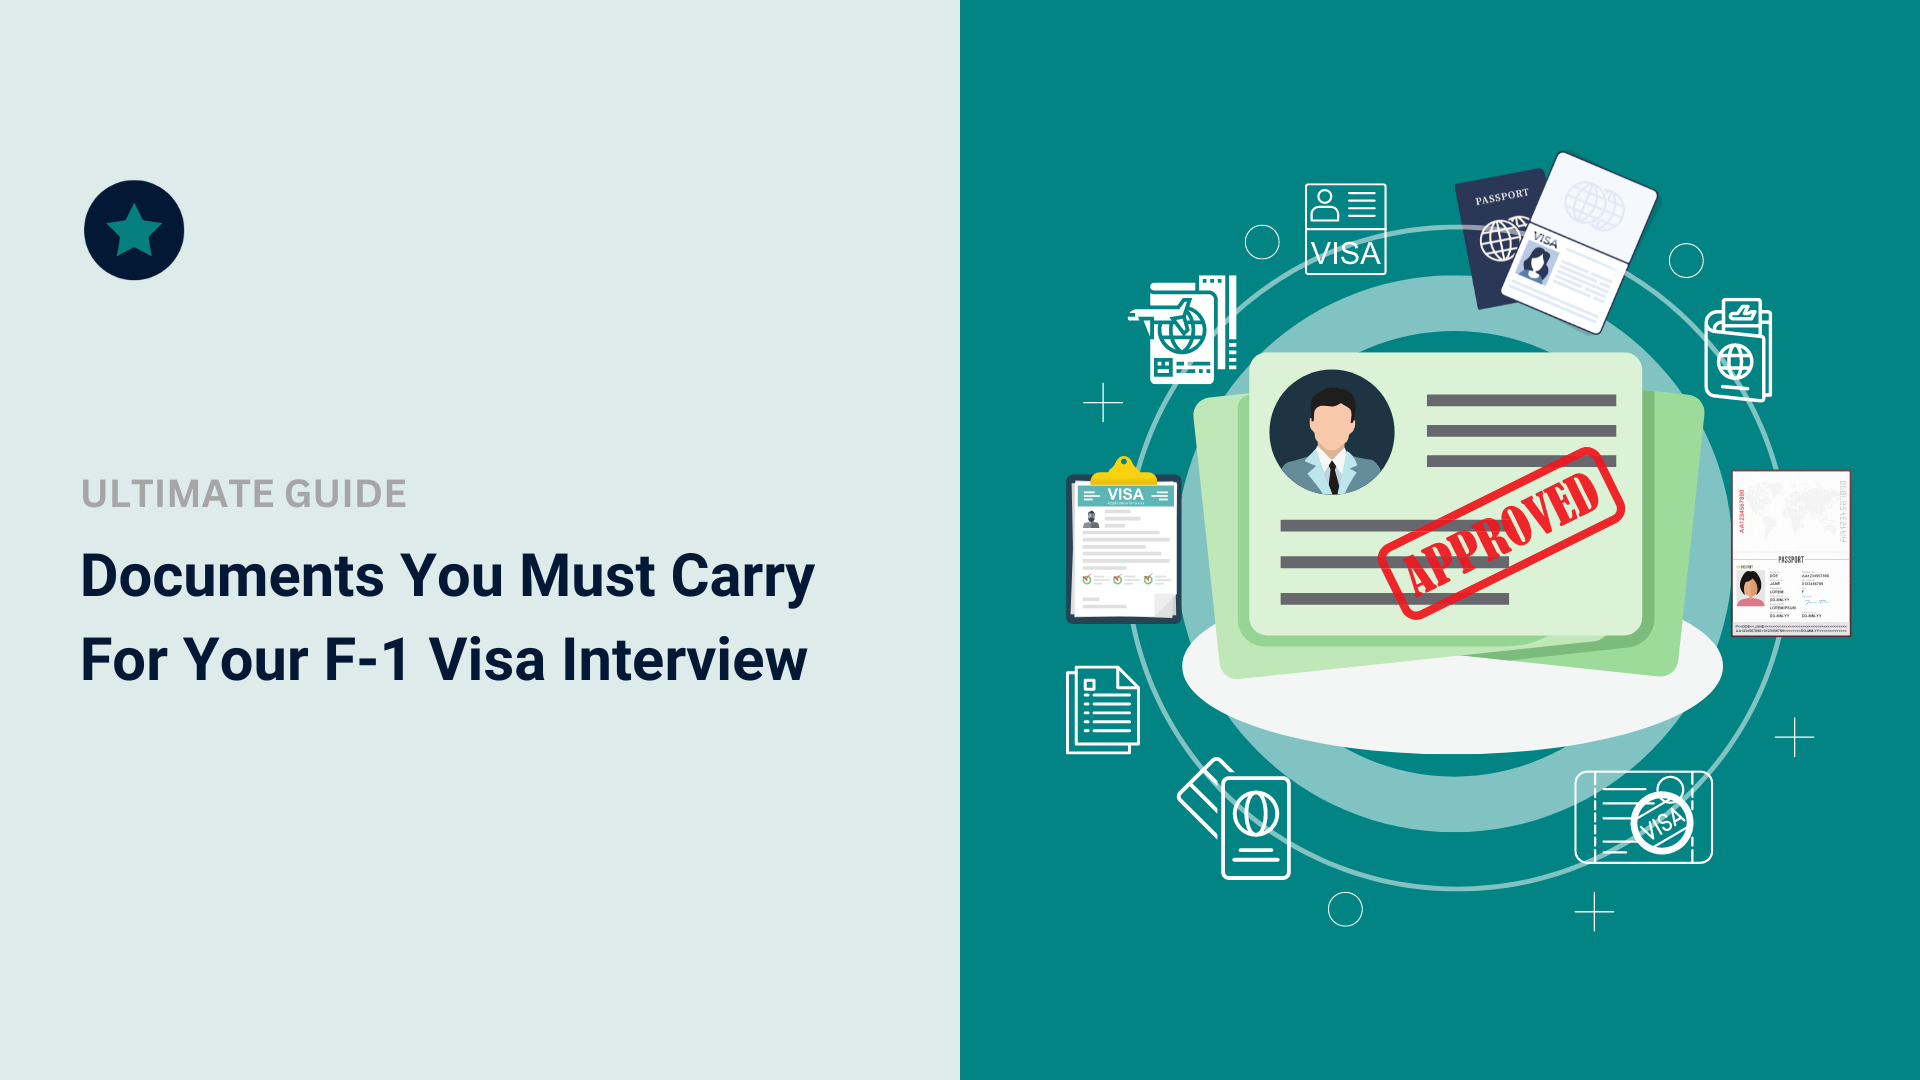 Documents You Must Carry For Your F-1 Visa Interview